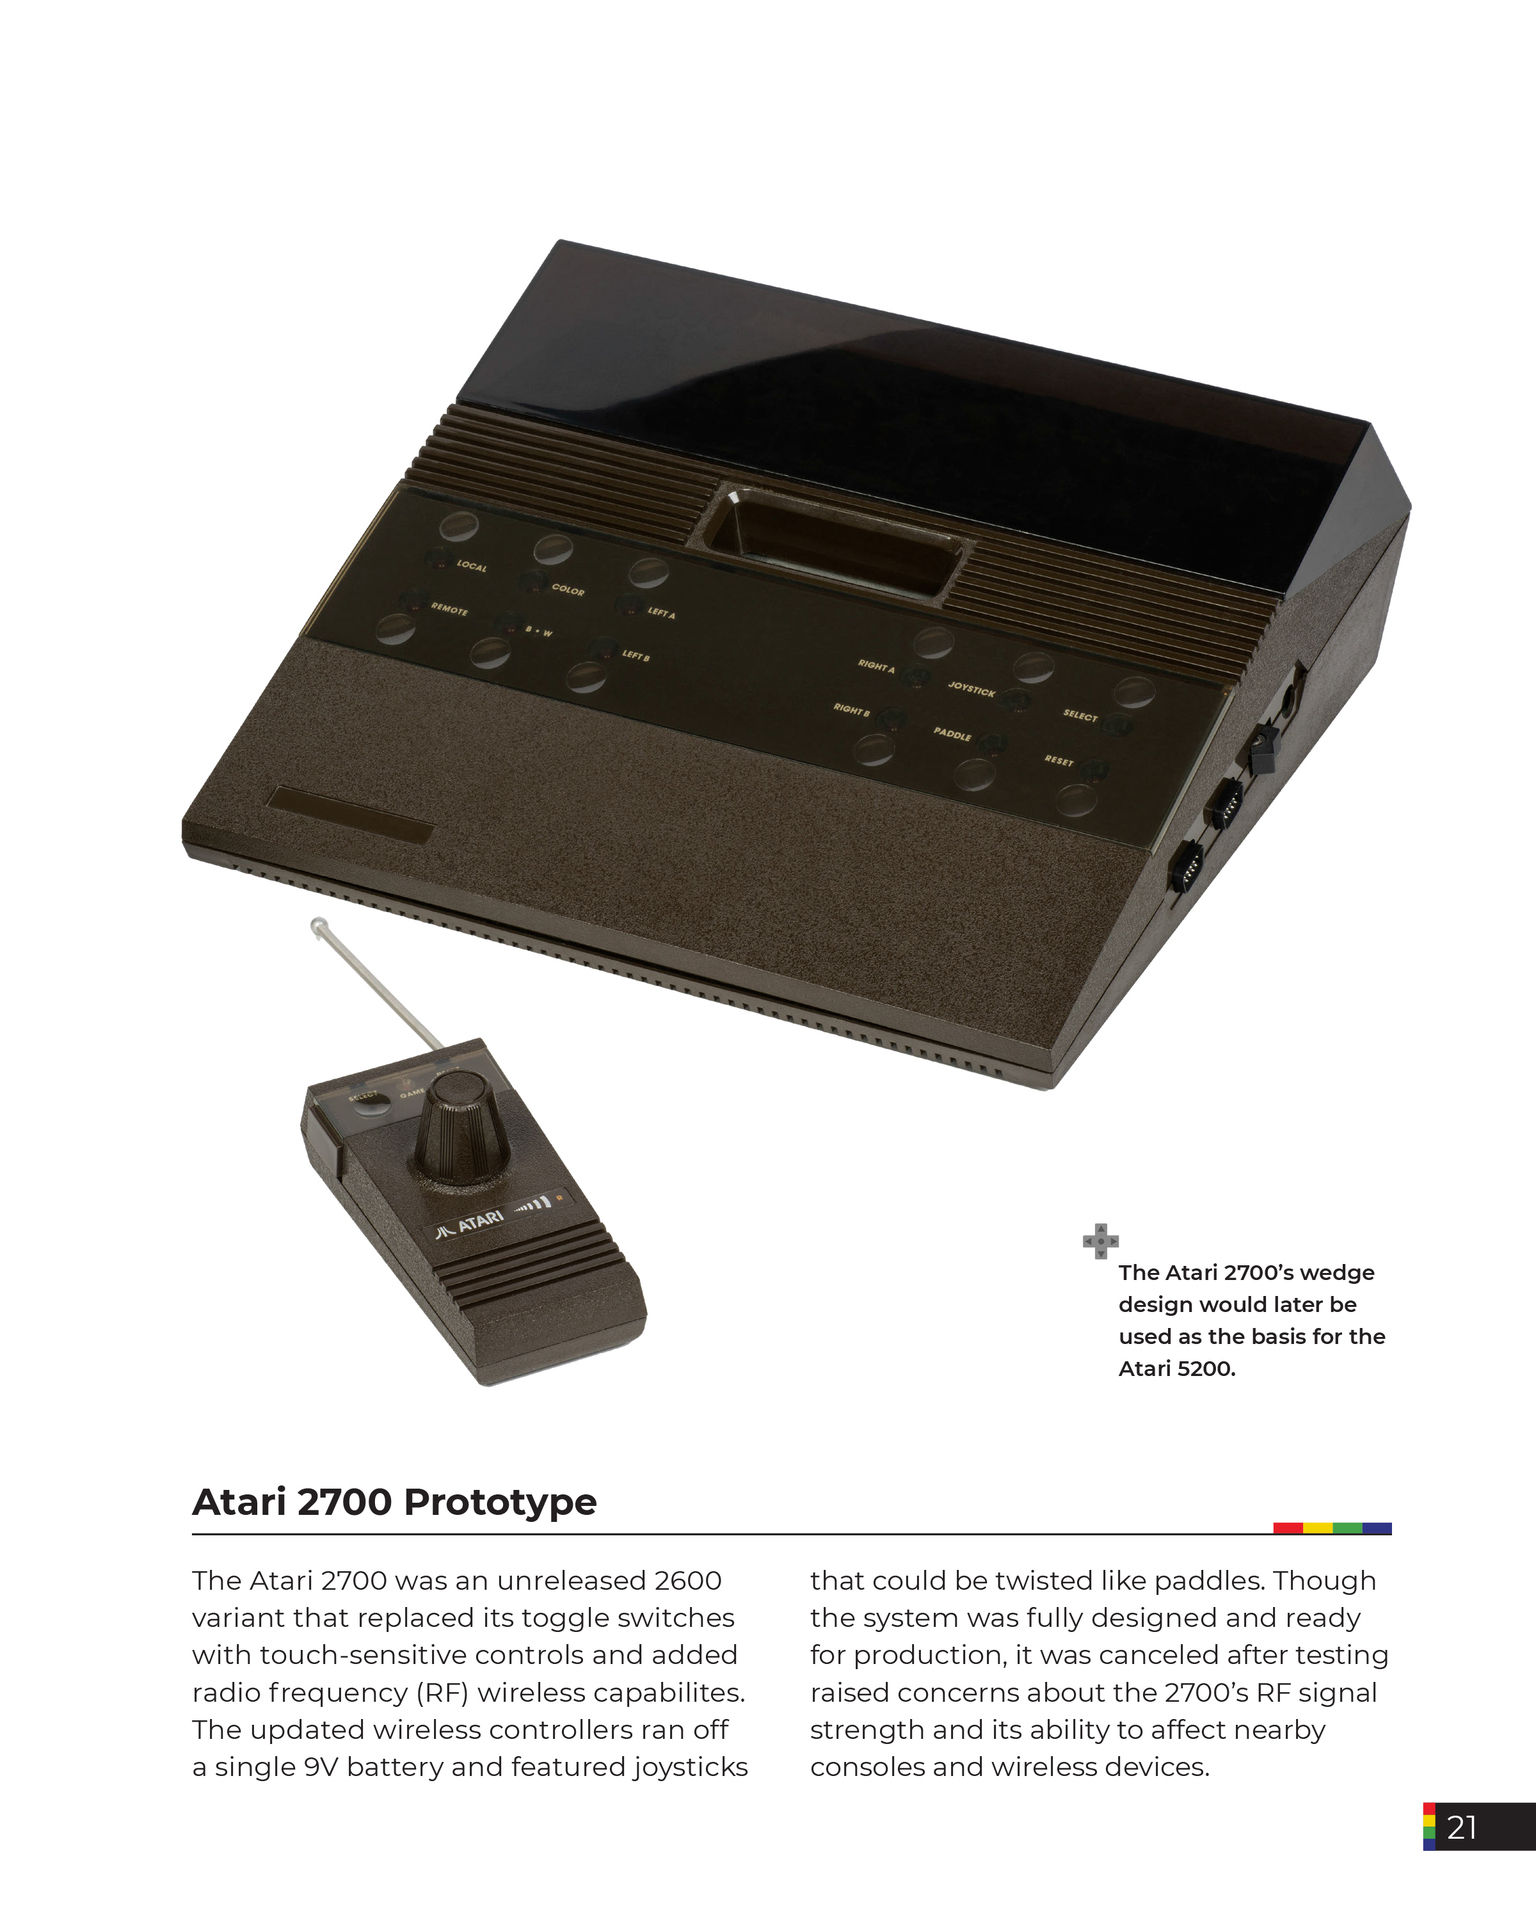 The game console a photographic history from Atari to Xbox - photo 34